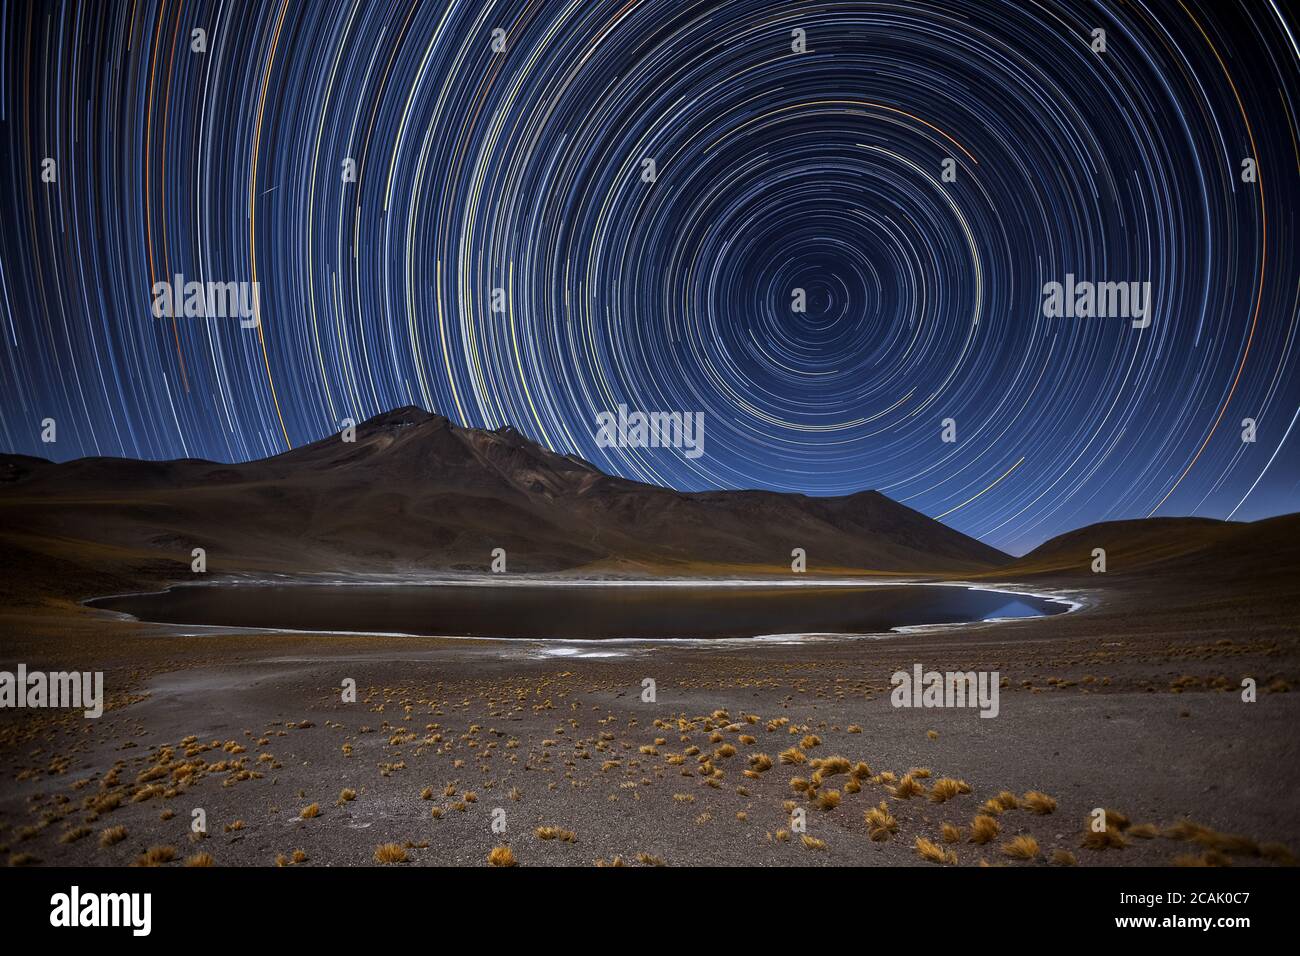 Science and art unite in this beautiful photograph, taken in Chile’s Atacama Desert by ESO Photo Ambassador Adhemar M. Duro Jr. To create this visual masterpiece Adhemar pointed his camera at the sky’s south pole, the point at the centre of all the bright arcs and circles. All the stars in the night sky revolve around this point. Over a period of several hours, this motion creates star trails, with each individual star tracing out a circle on the sky. These trails display the various brightnesses and colours of each star, creating a captivating scene! Towards the top left of the image, you can Stock Photo